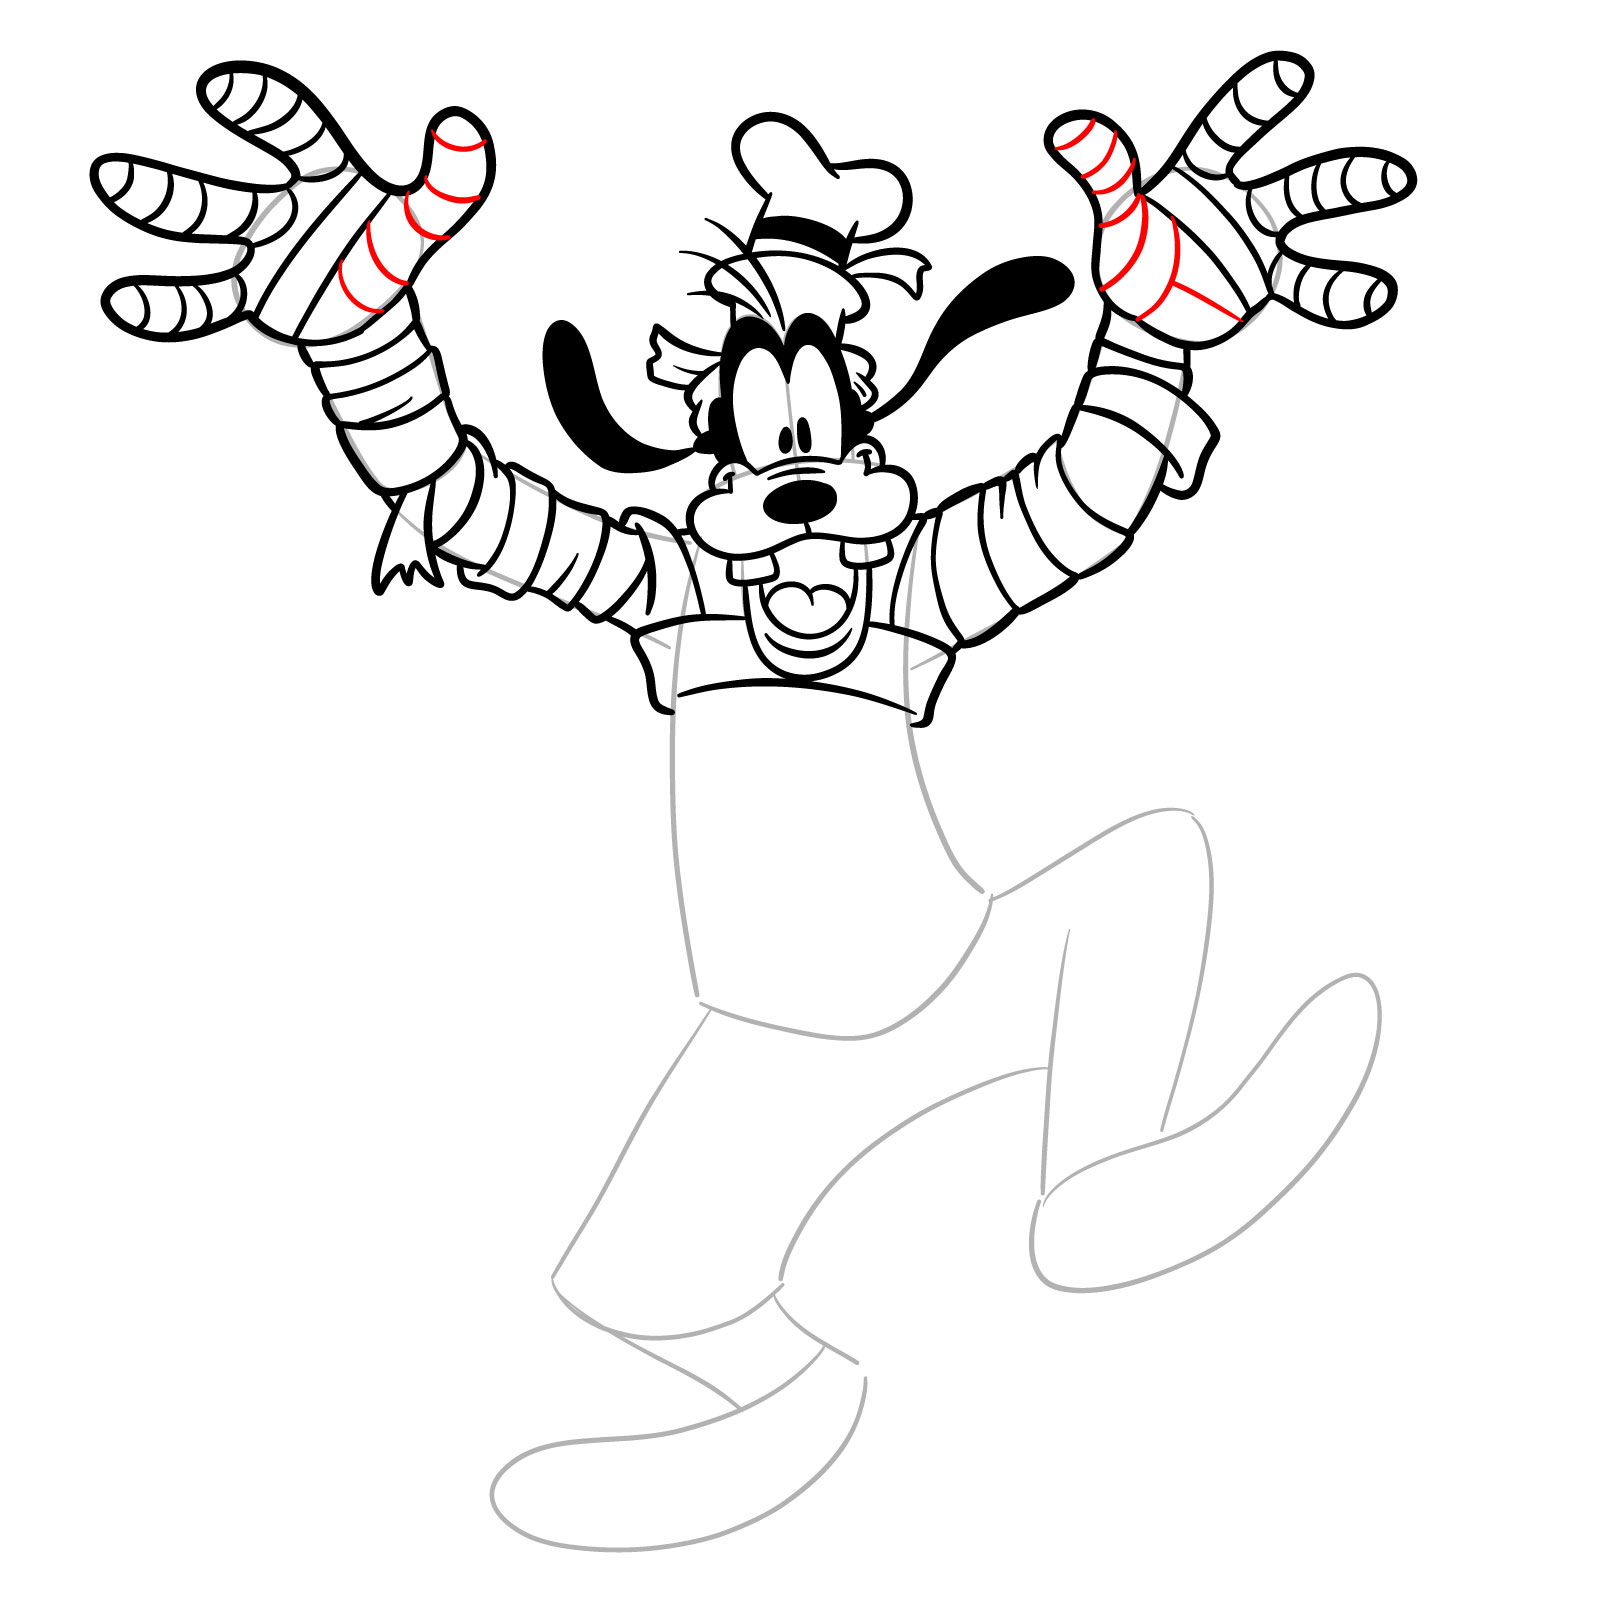 How to draw Halloween Goofy as a mummy - step 21